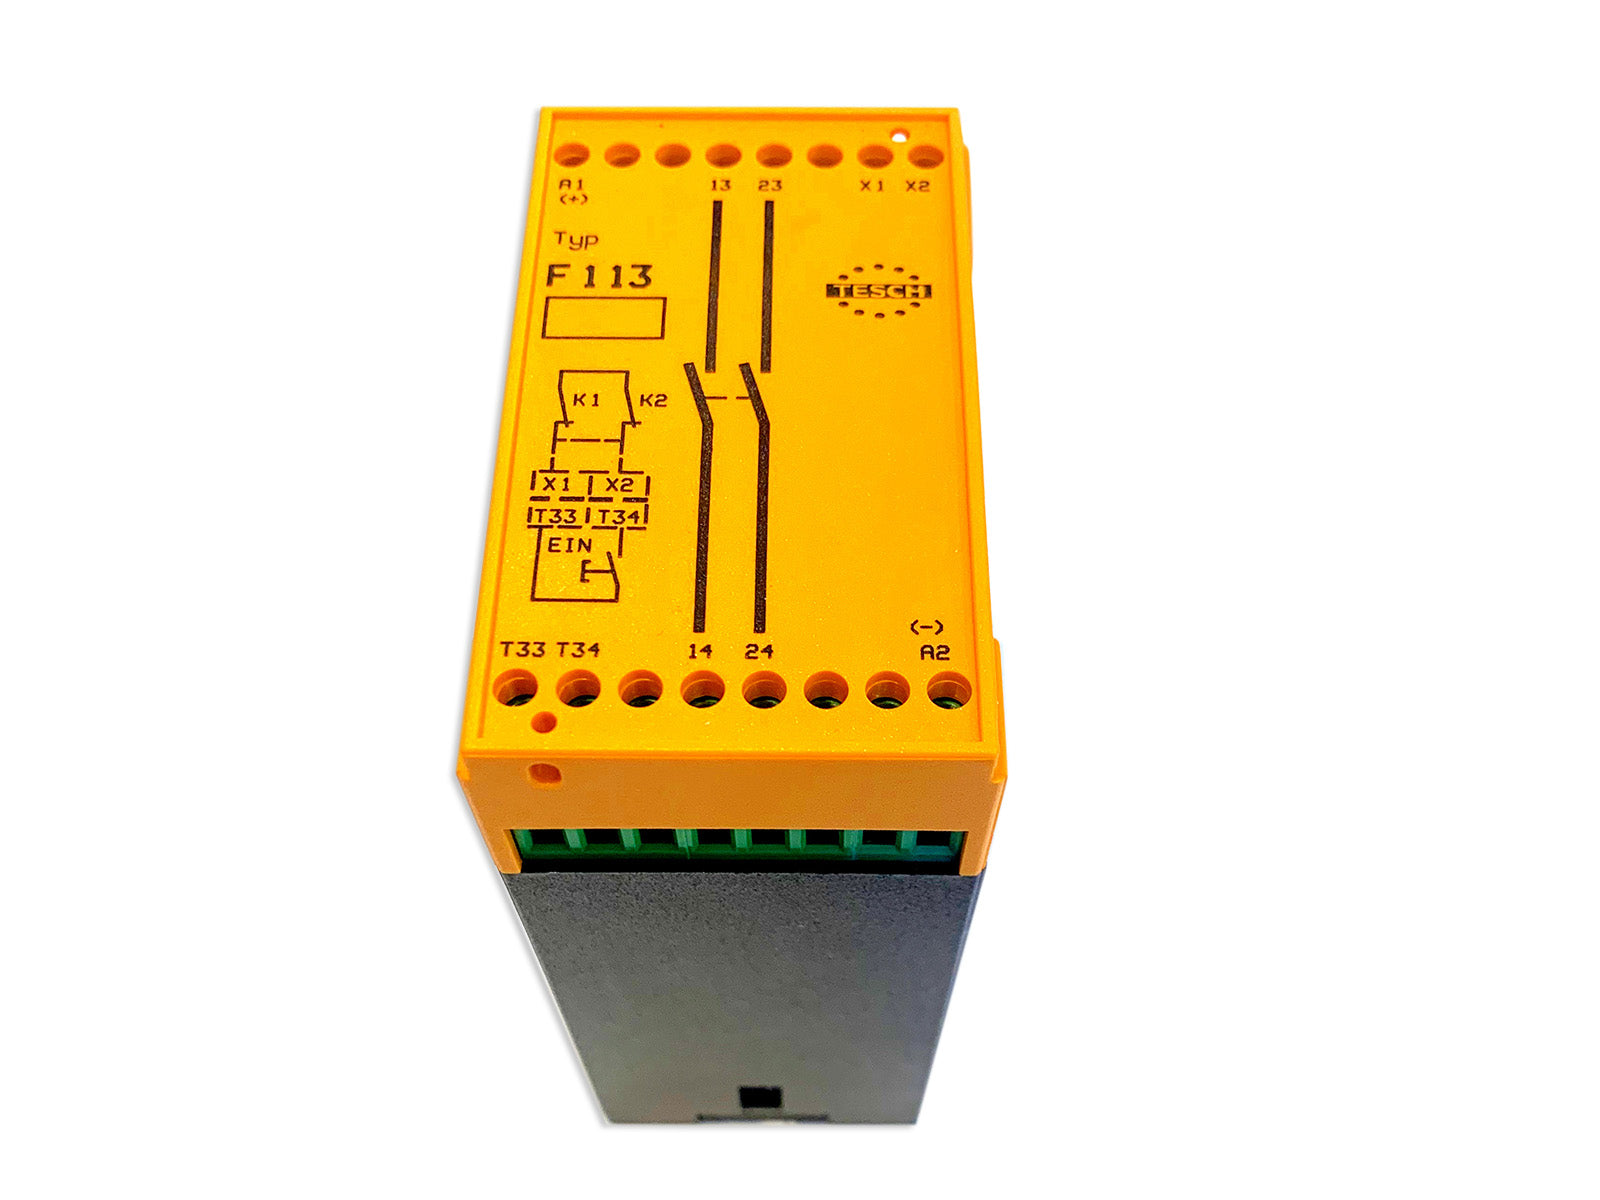 Tesch Safety Relay Type F113X04 - ppdistributors